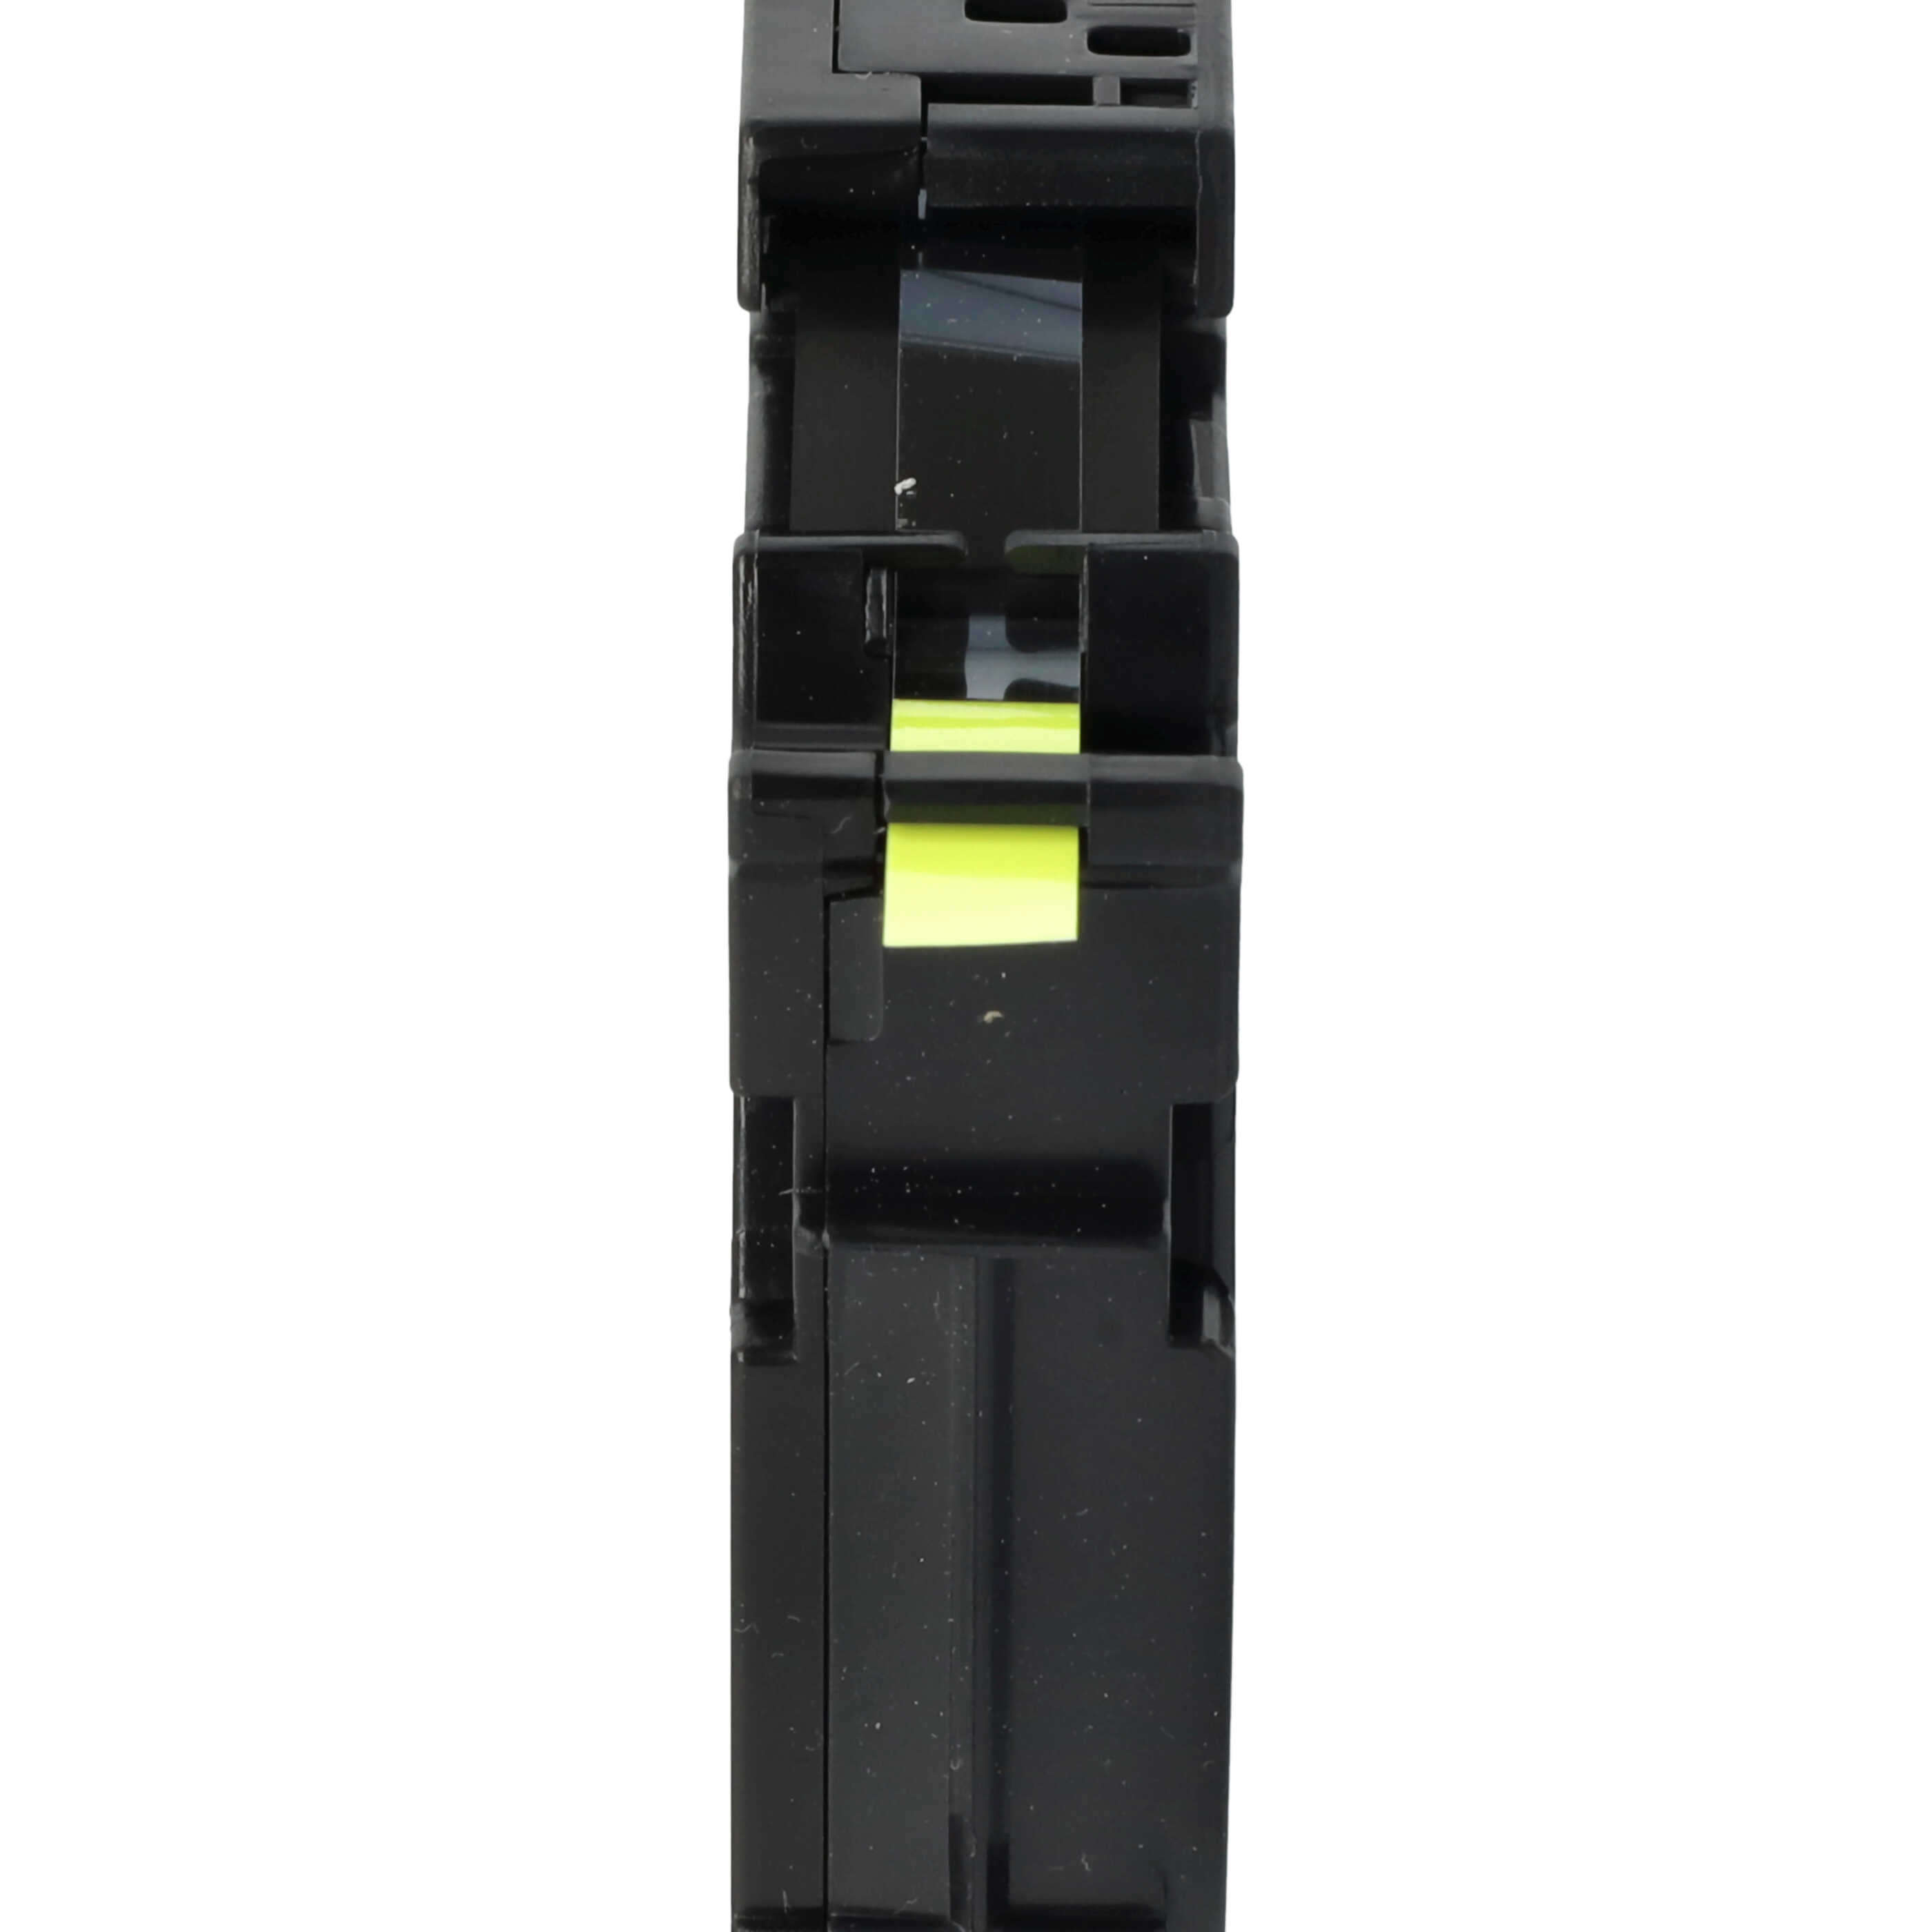 Label Tape as Replacement for Brother TZ-C11, TZE-C11 - 6 mm Black to Neon-Yellow